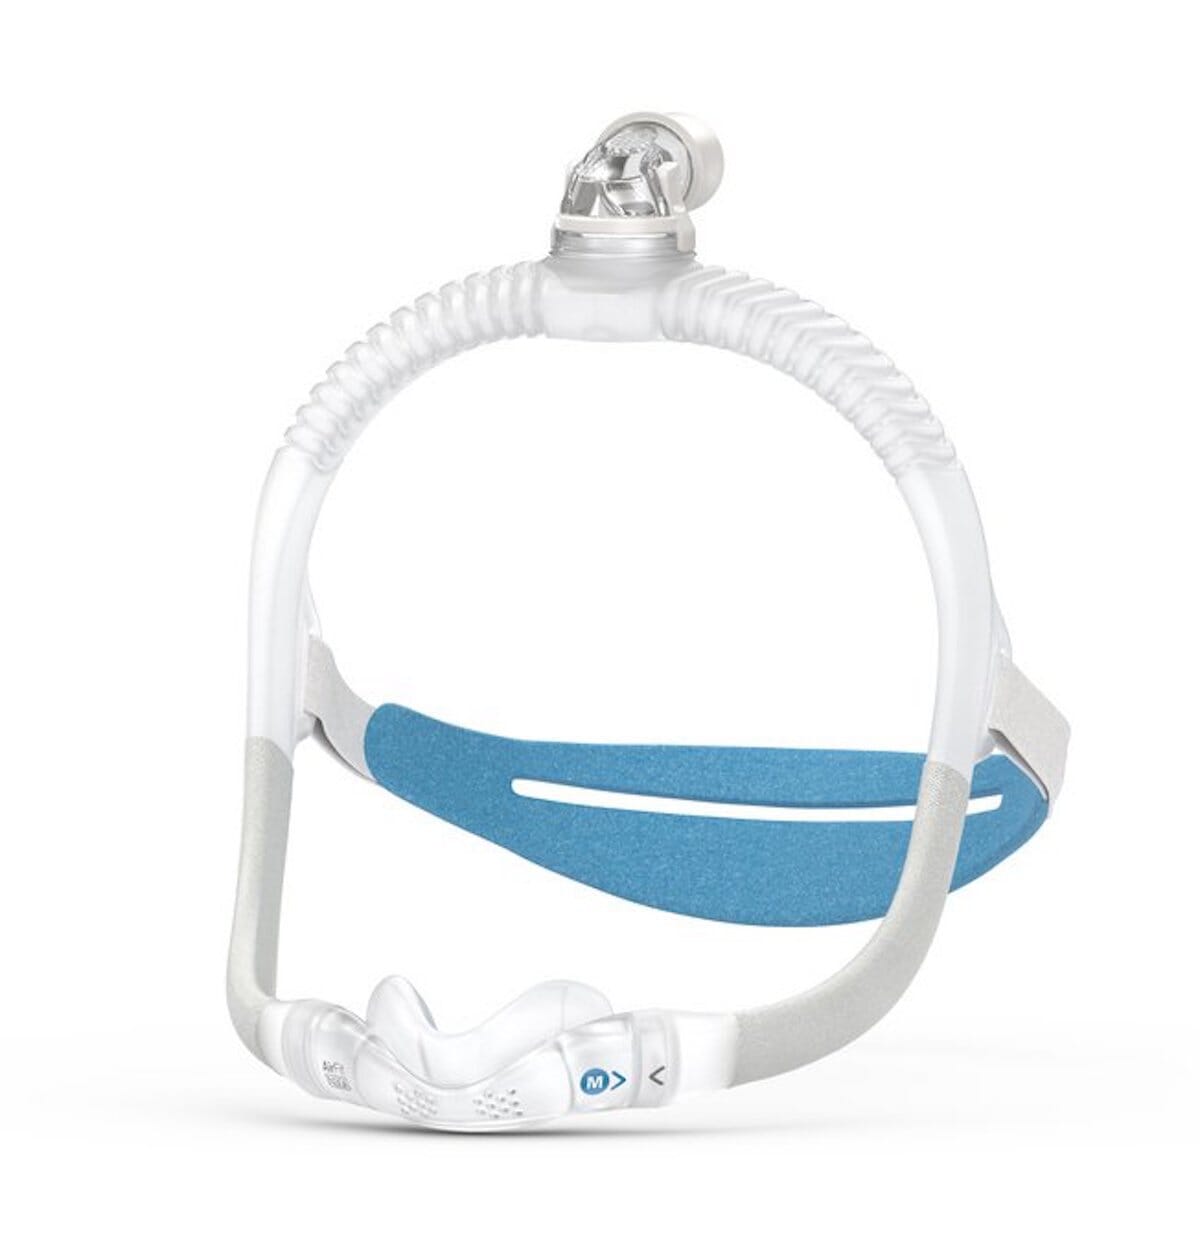 The Resmed Airfit N30i Nasal Cpap Mask Review 1252